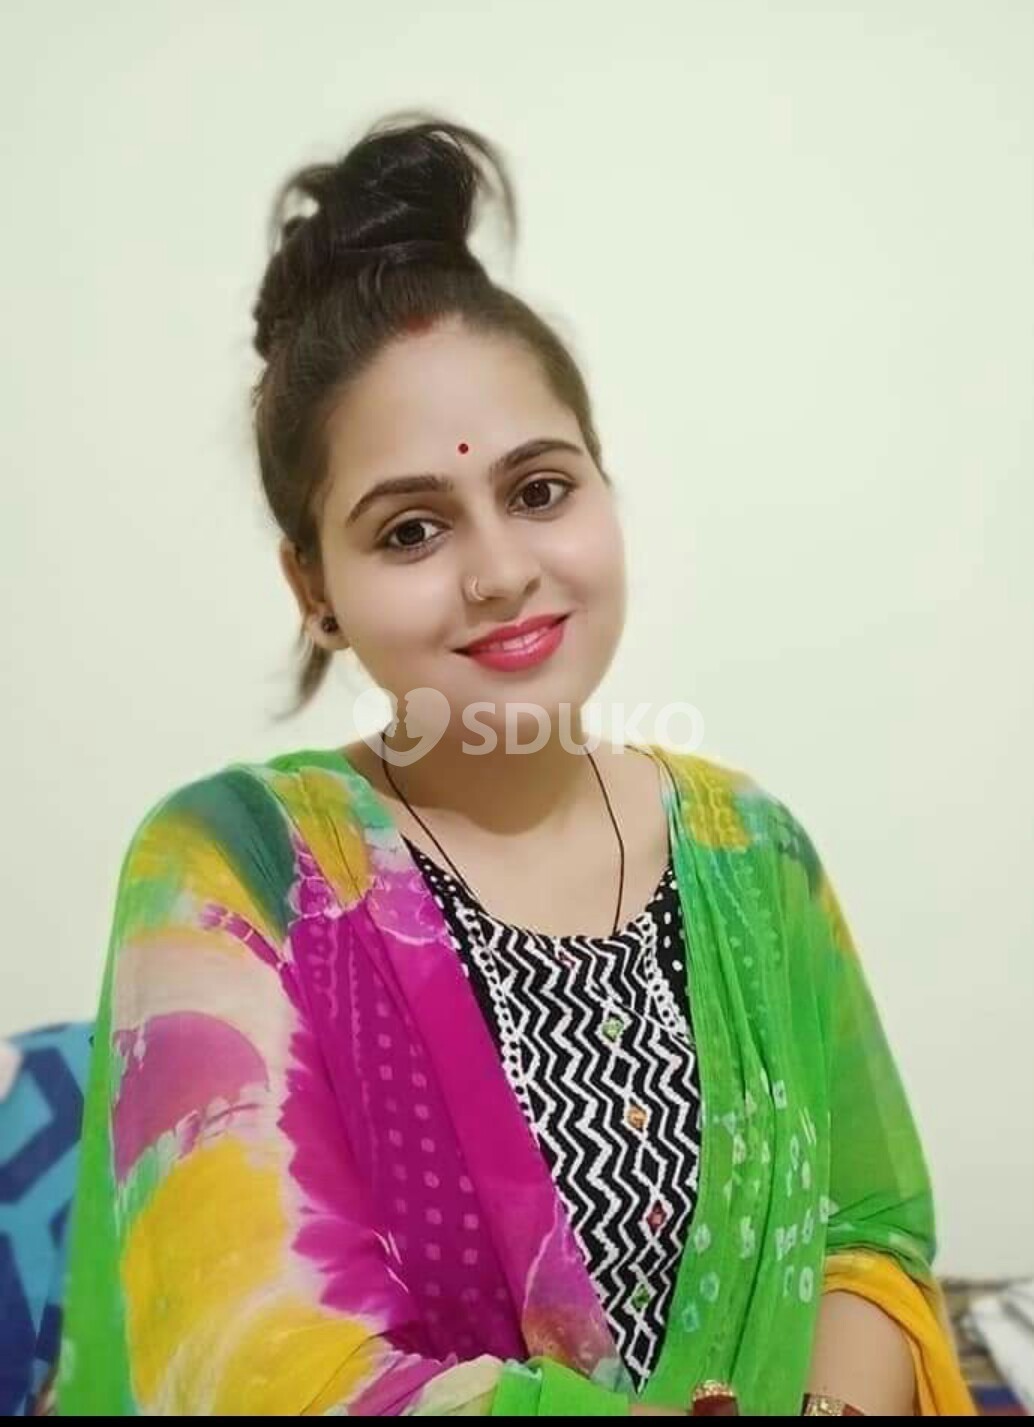 Hello Guys I am Nandini Pimpri Chinchwad low cost unlimited hard sex call girls service available